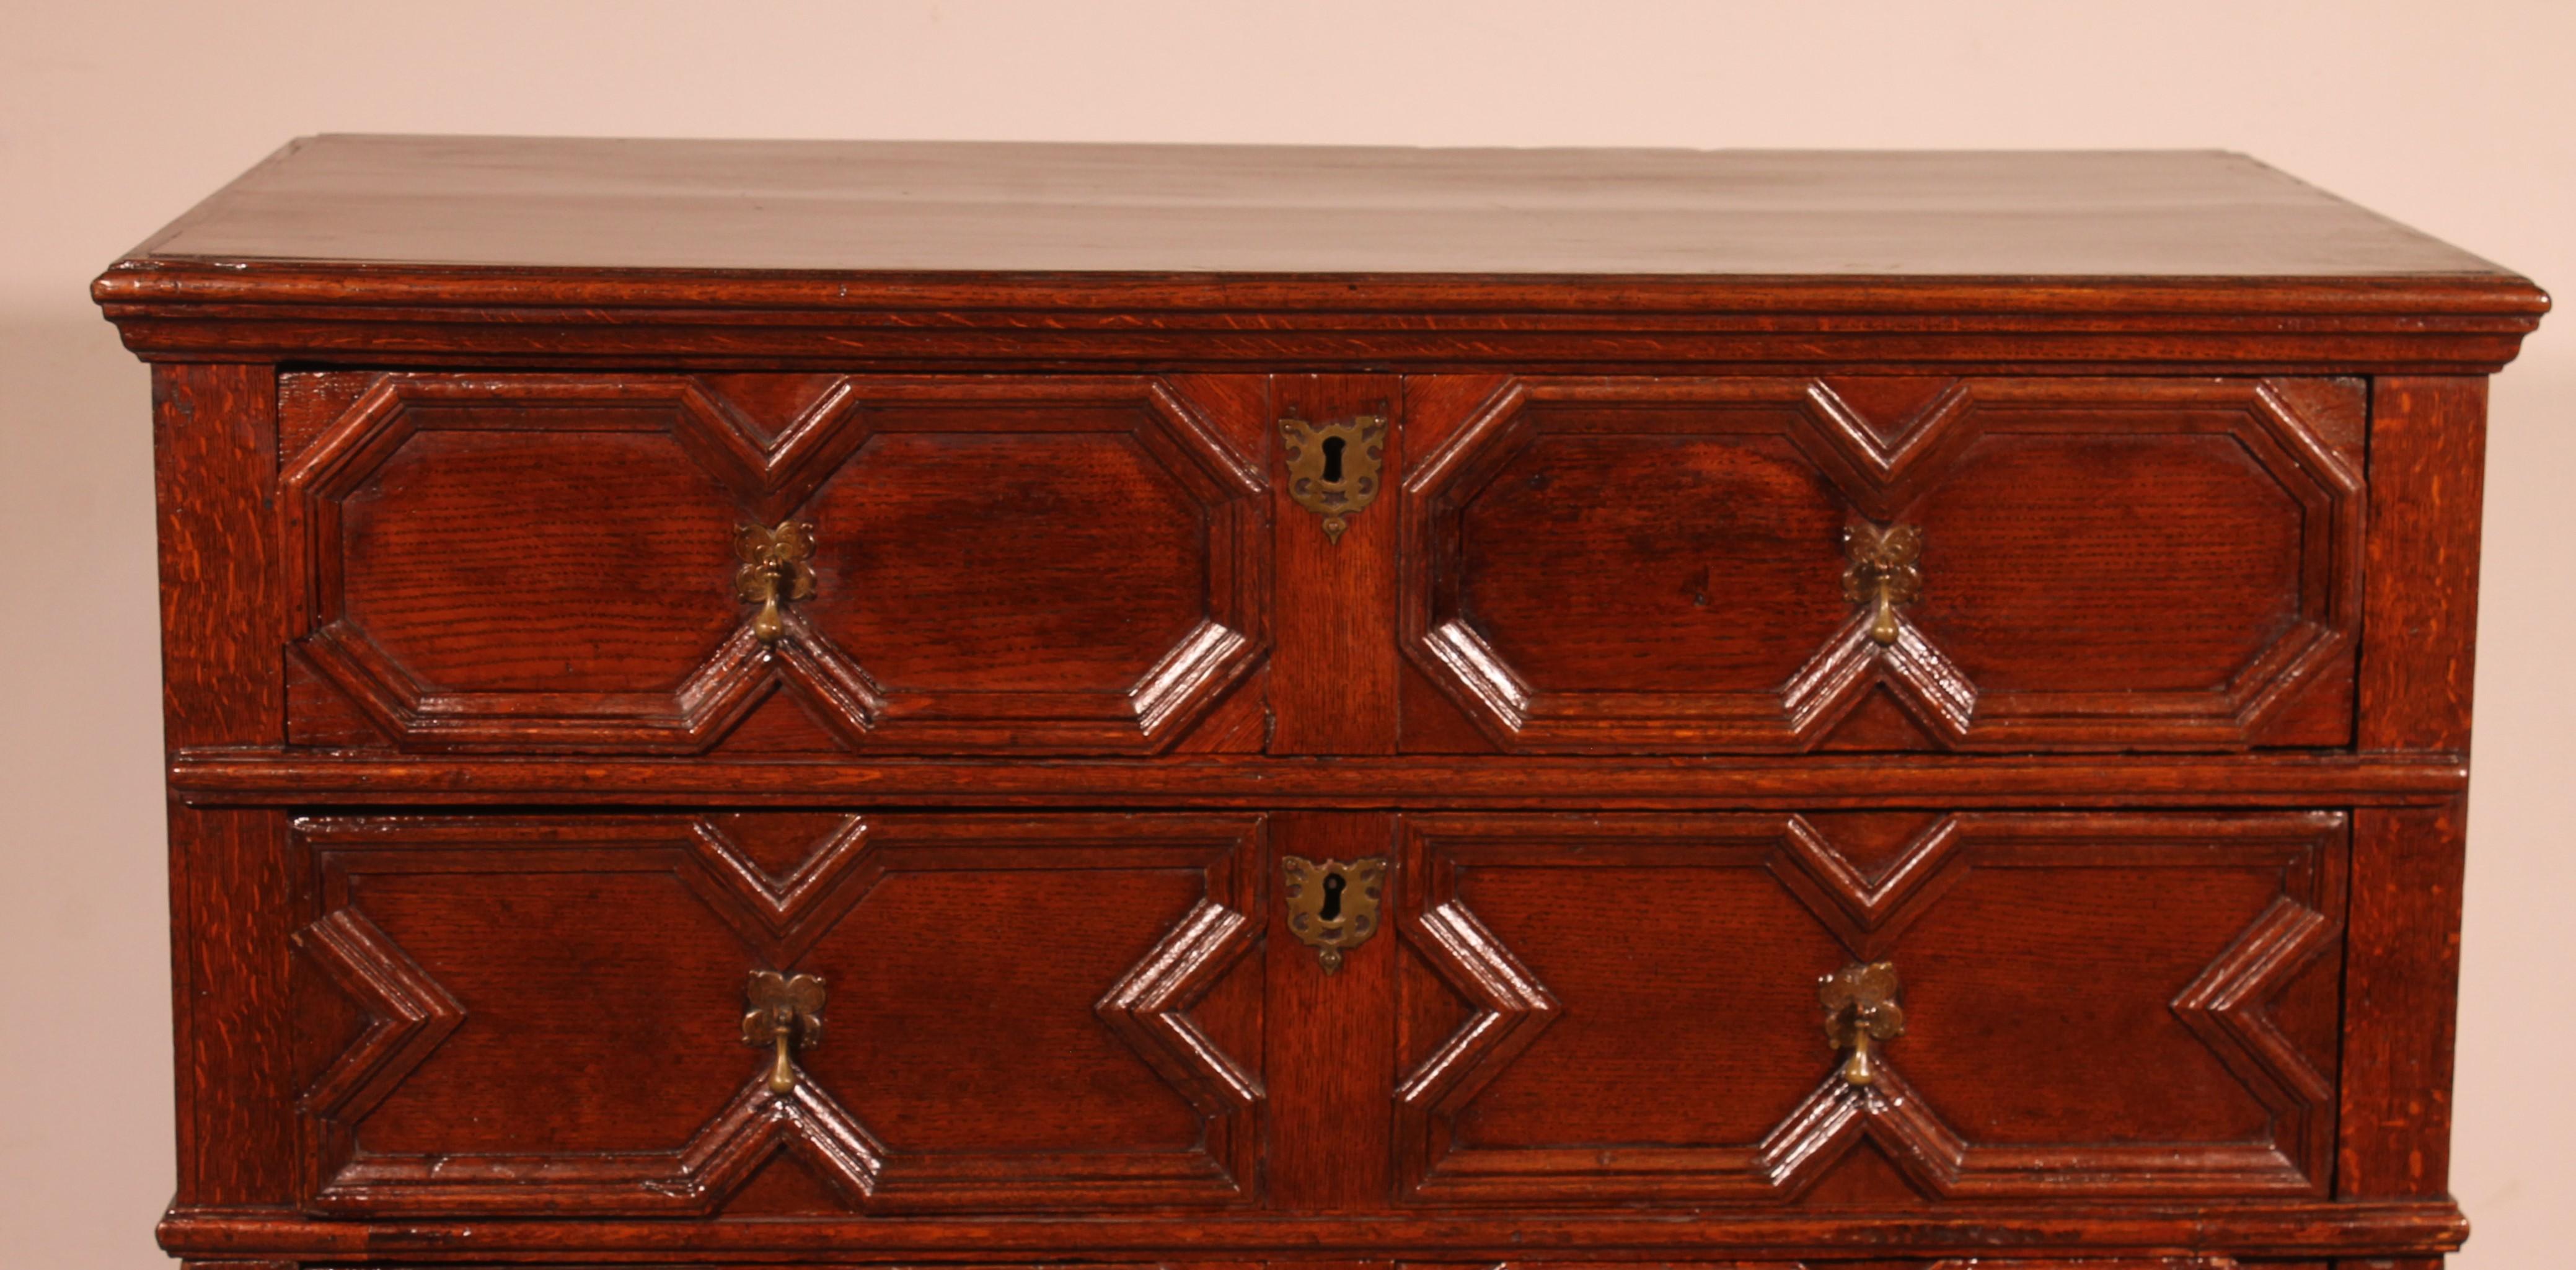 Superb Jacobean period chest of drawers from the 17th century from England in oak

Very beautiful chest of drawers with a superb molding work on the drawers of very good quality as well as on its two sides which is typical of Jacobean chests of